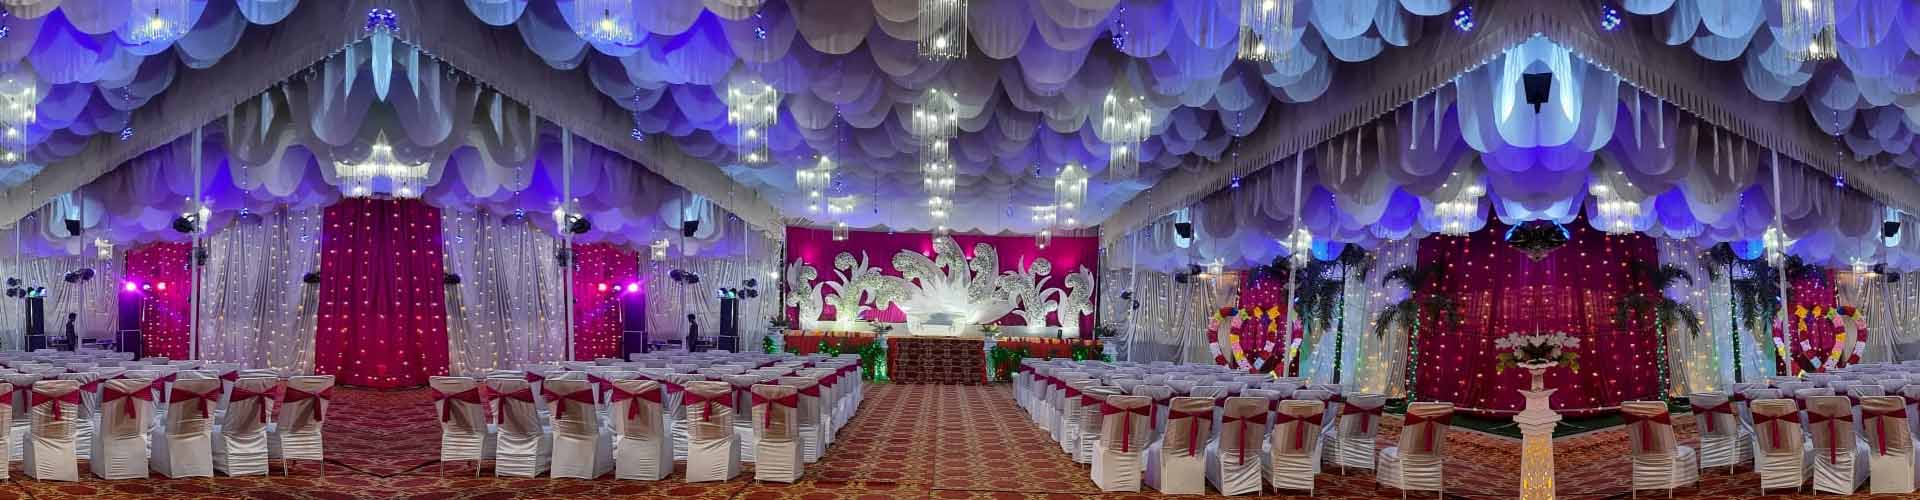 Venue Category Vendor Shaadyana Lawn And Banquets